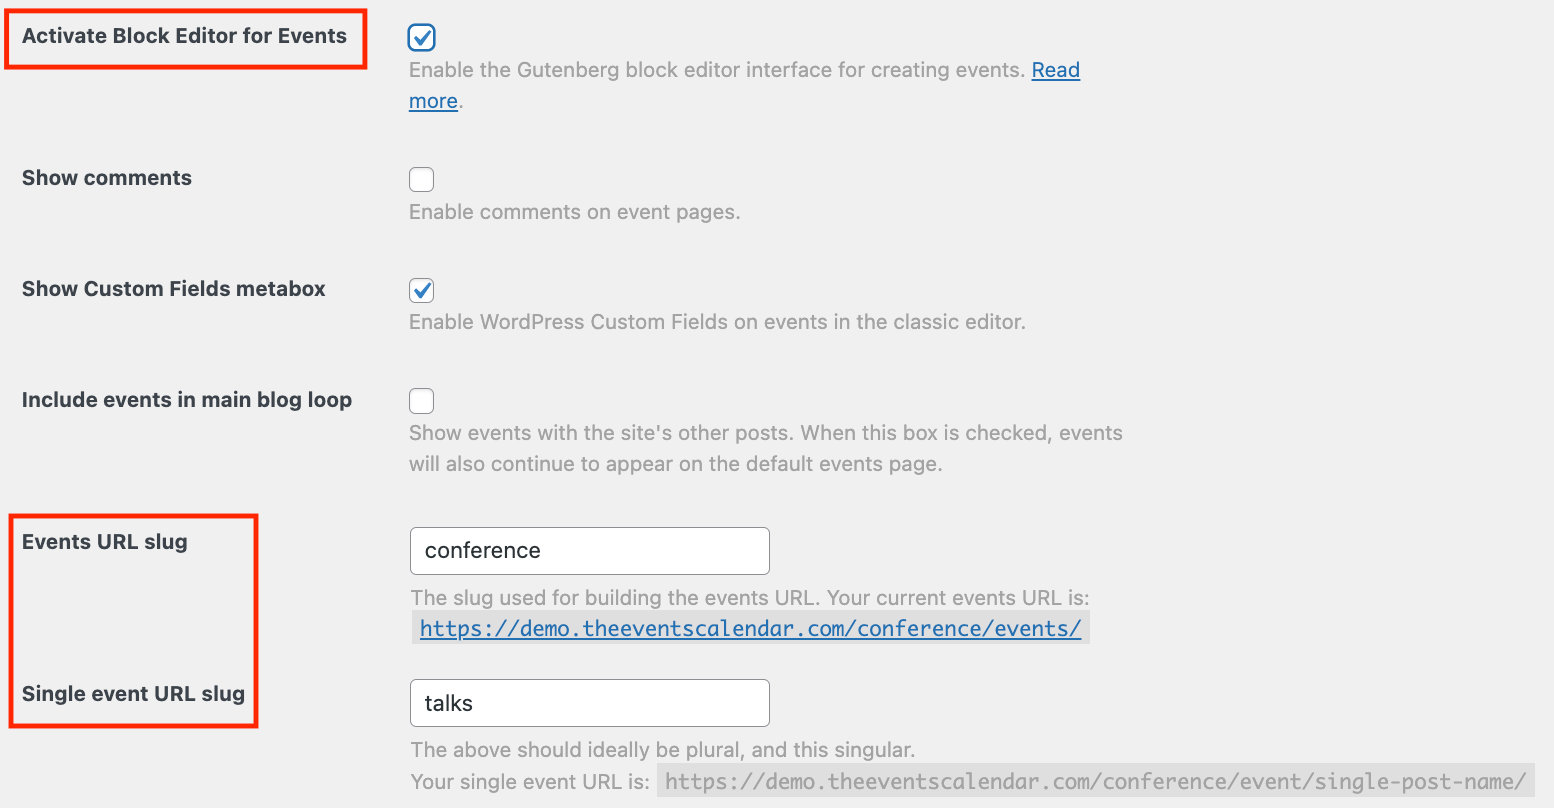 Activate Block Editor and change the Events and Single event URL 